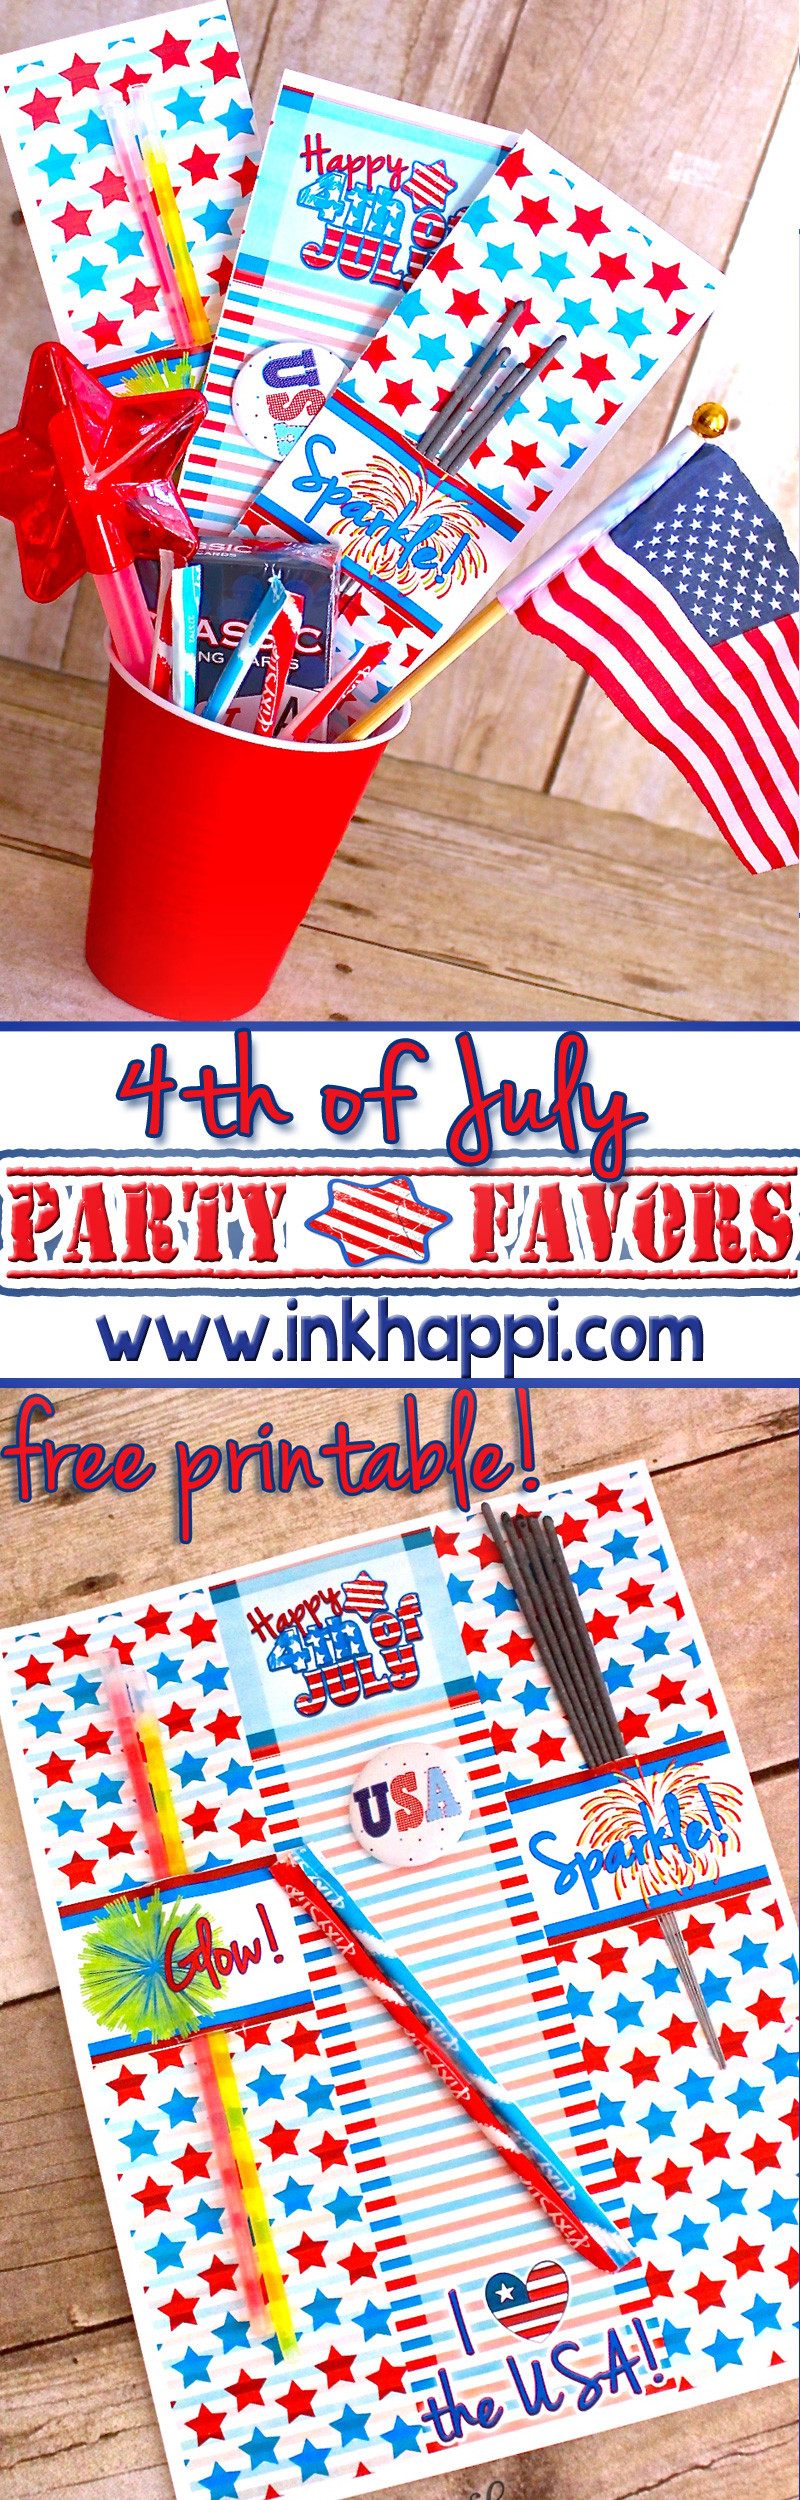 4th Of July Party Supplies
 4th of July Party favors Cheap and easy DIY inkhappi